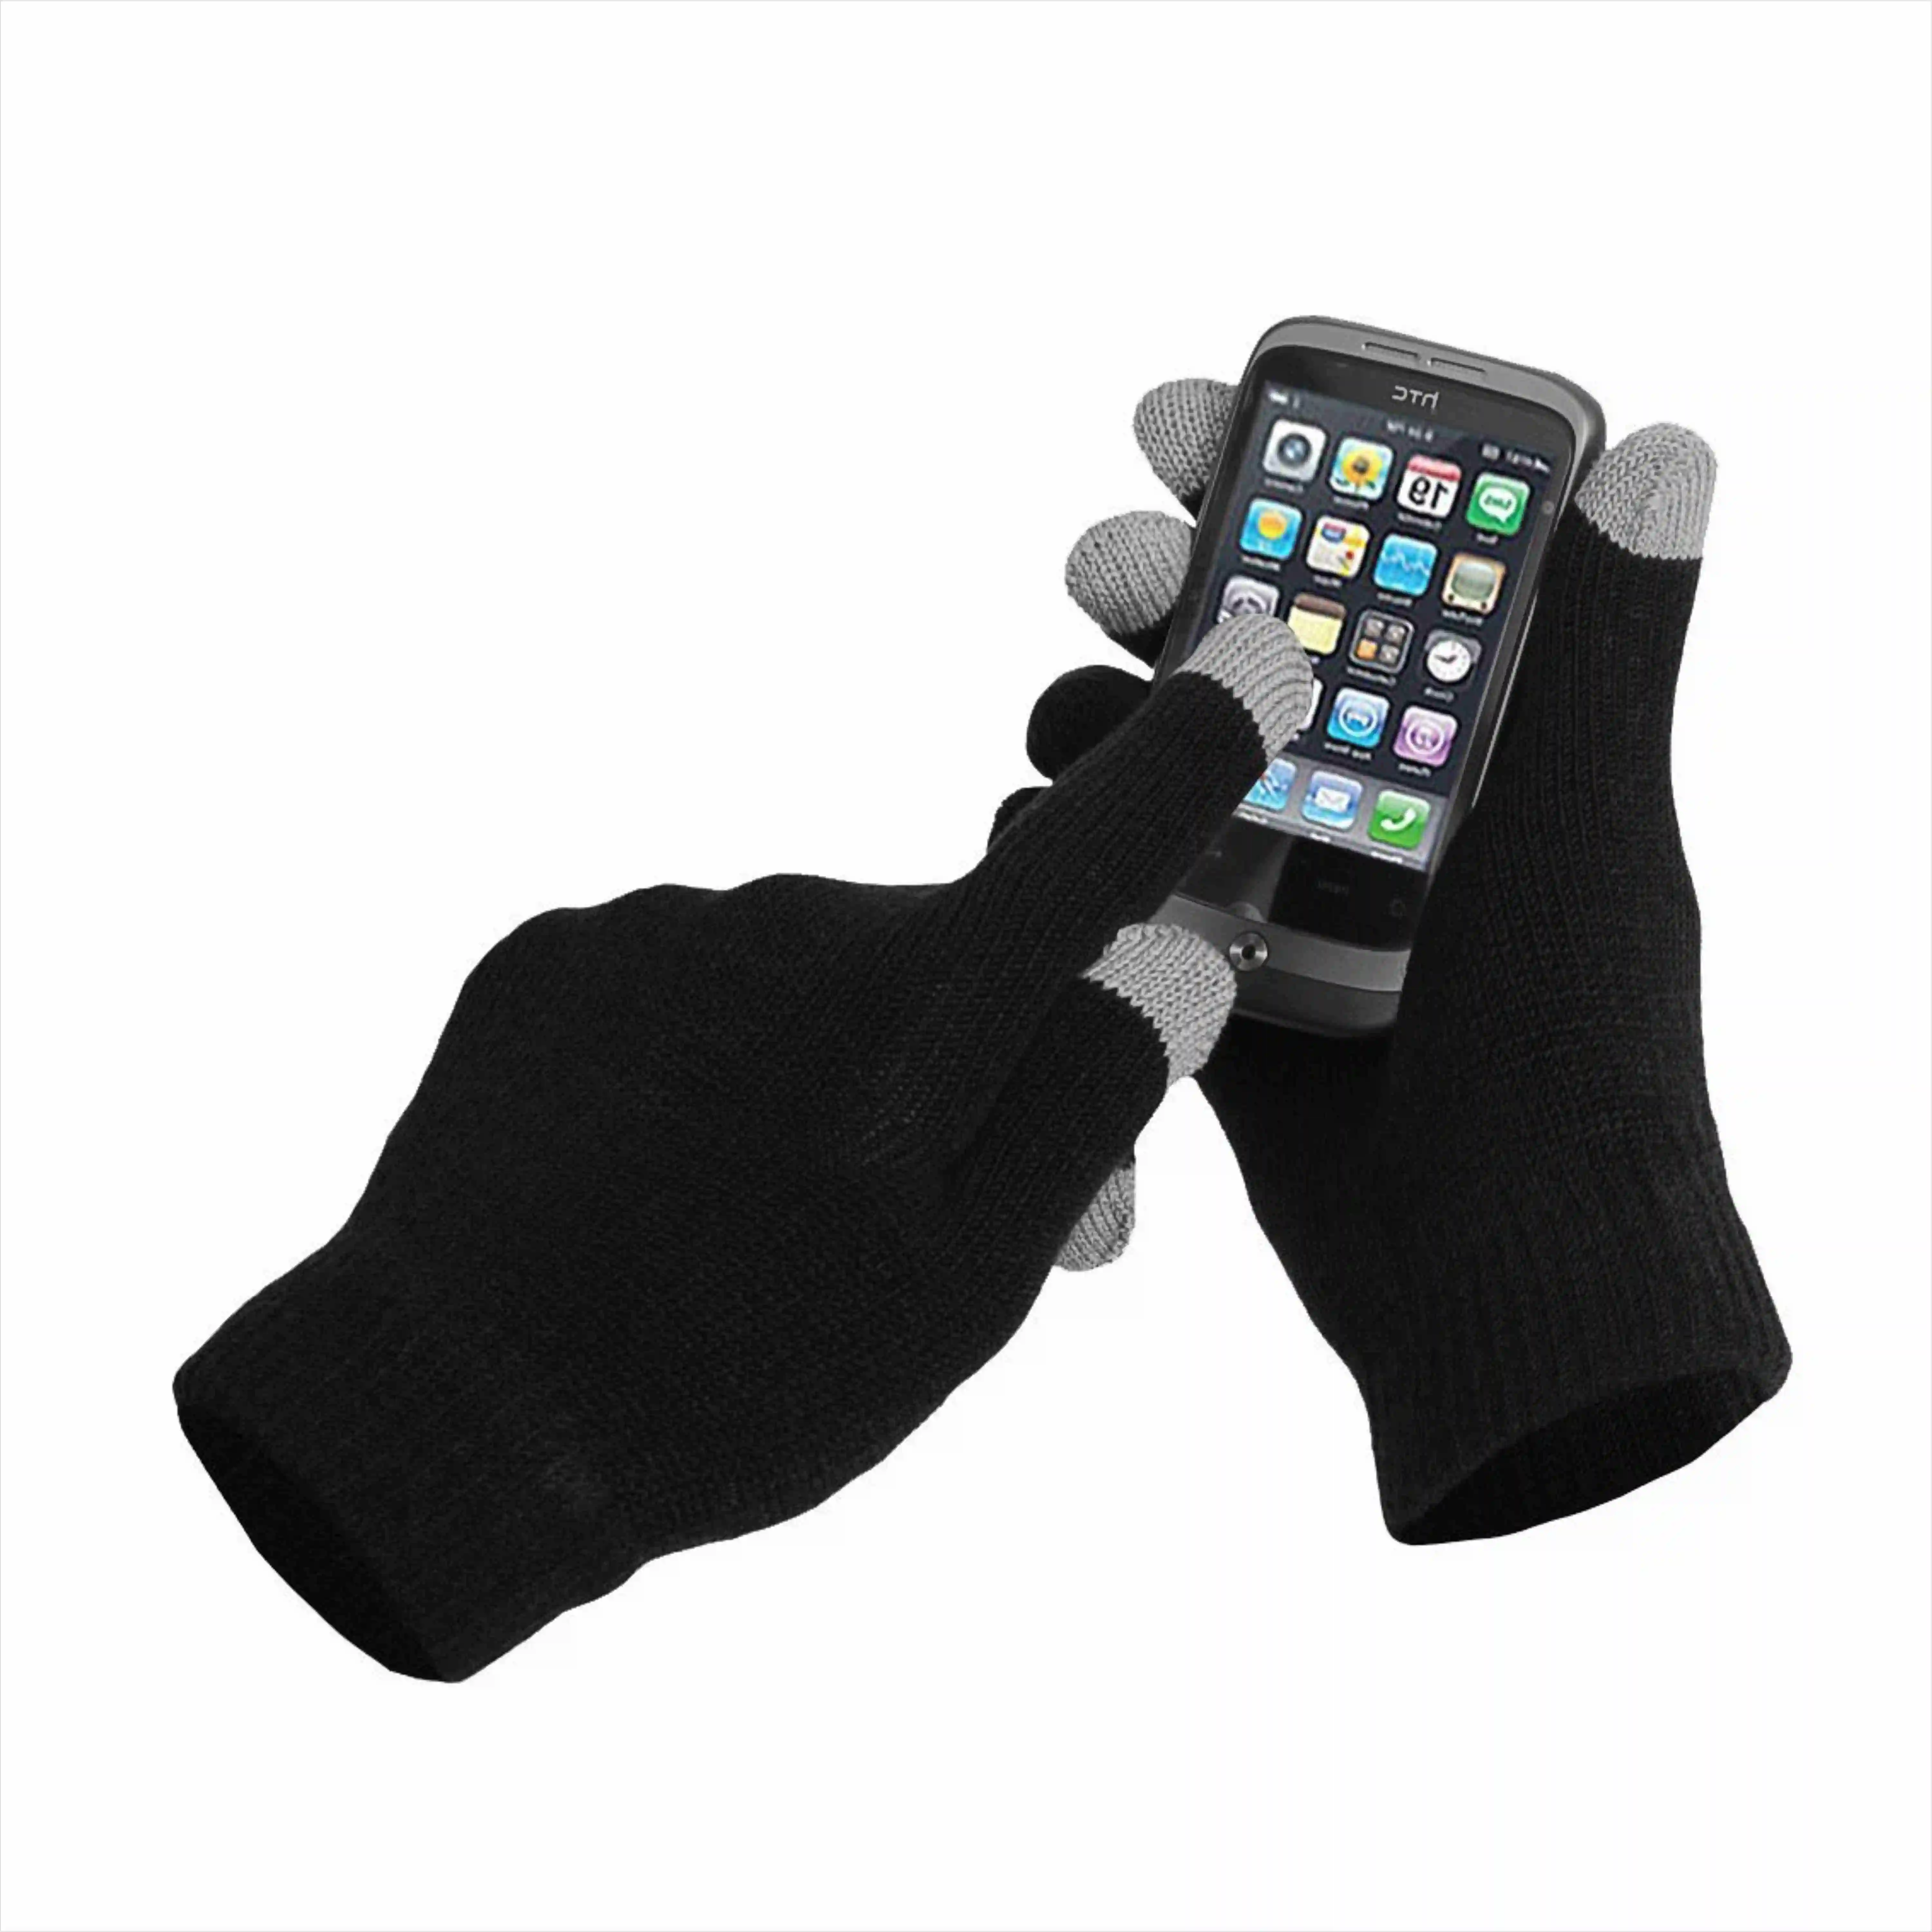 Low Price Promotional Soft Keep Warm Winter Mobile Phone Touch Screen Glove